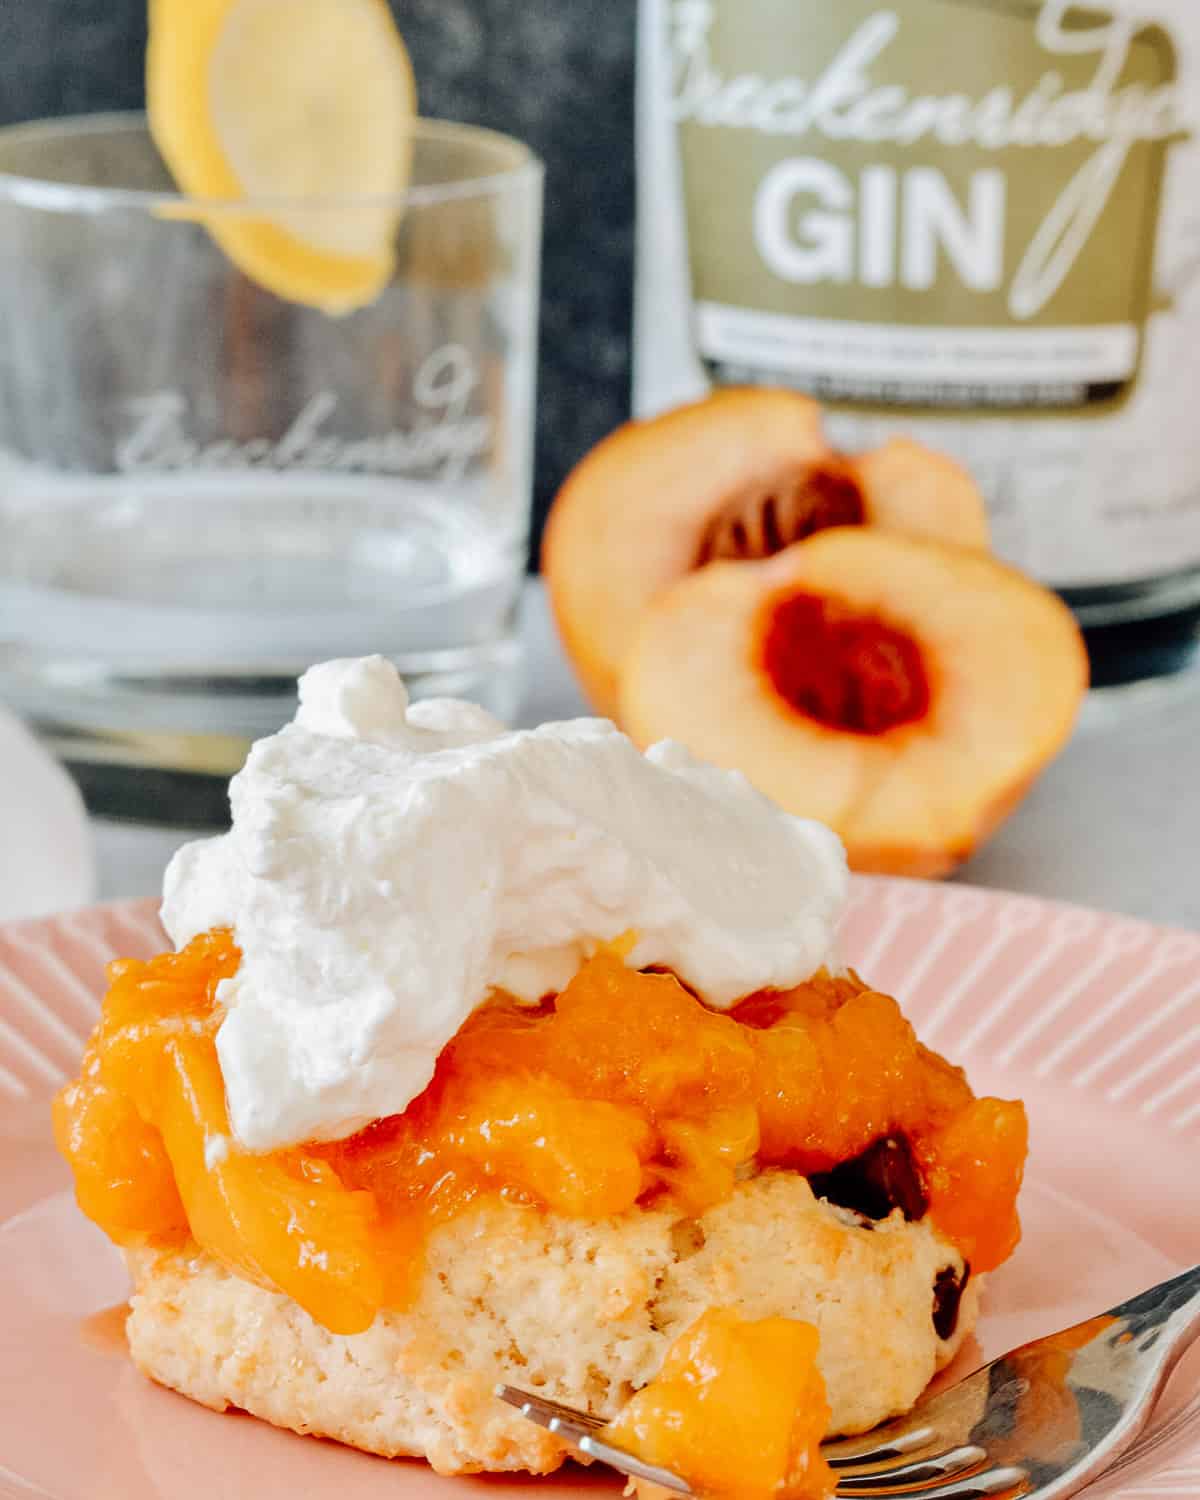 Peaches and cream shortbread on pink plate with Breckenridge Gin in background.